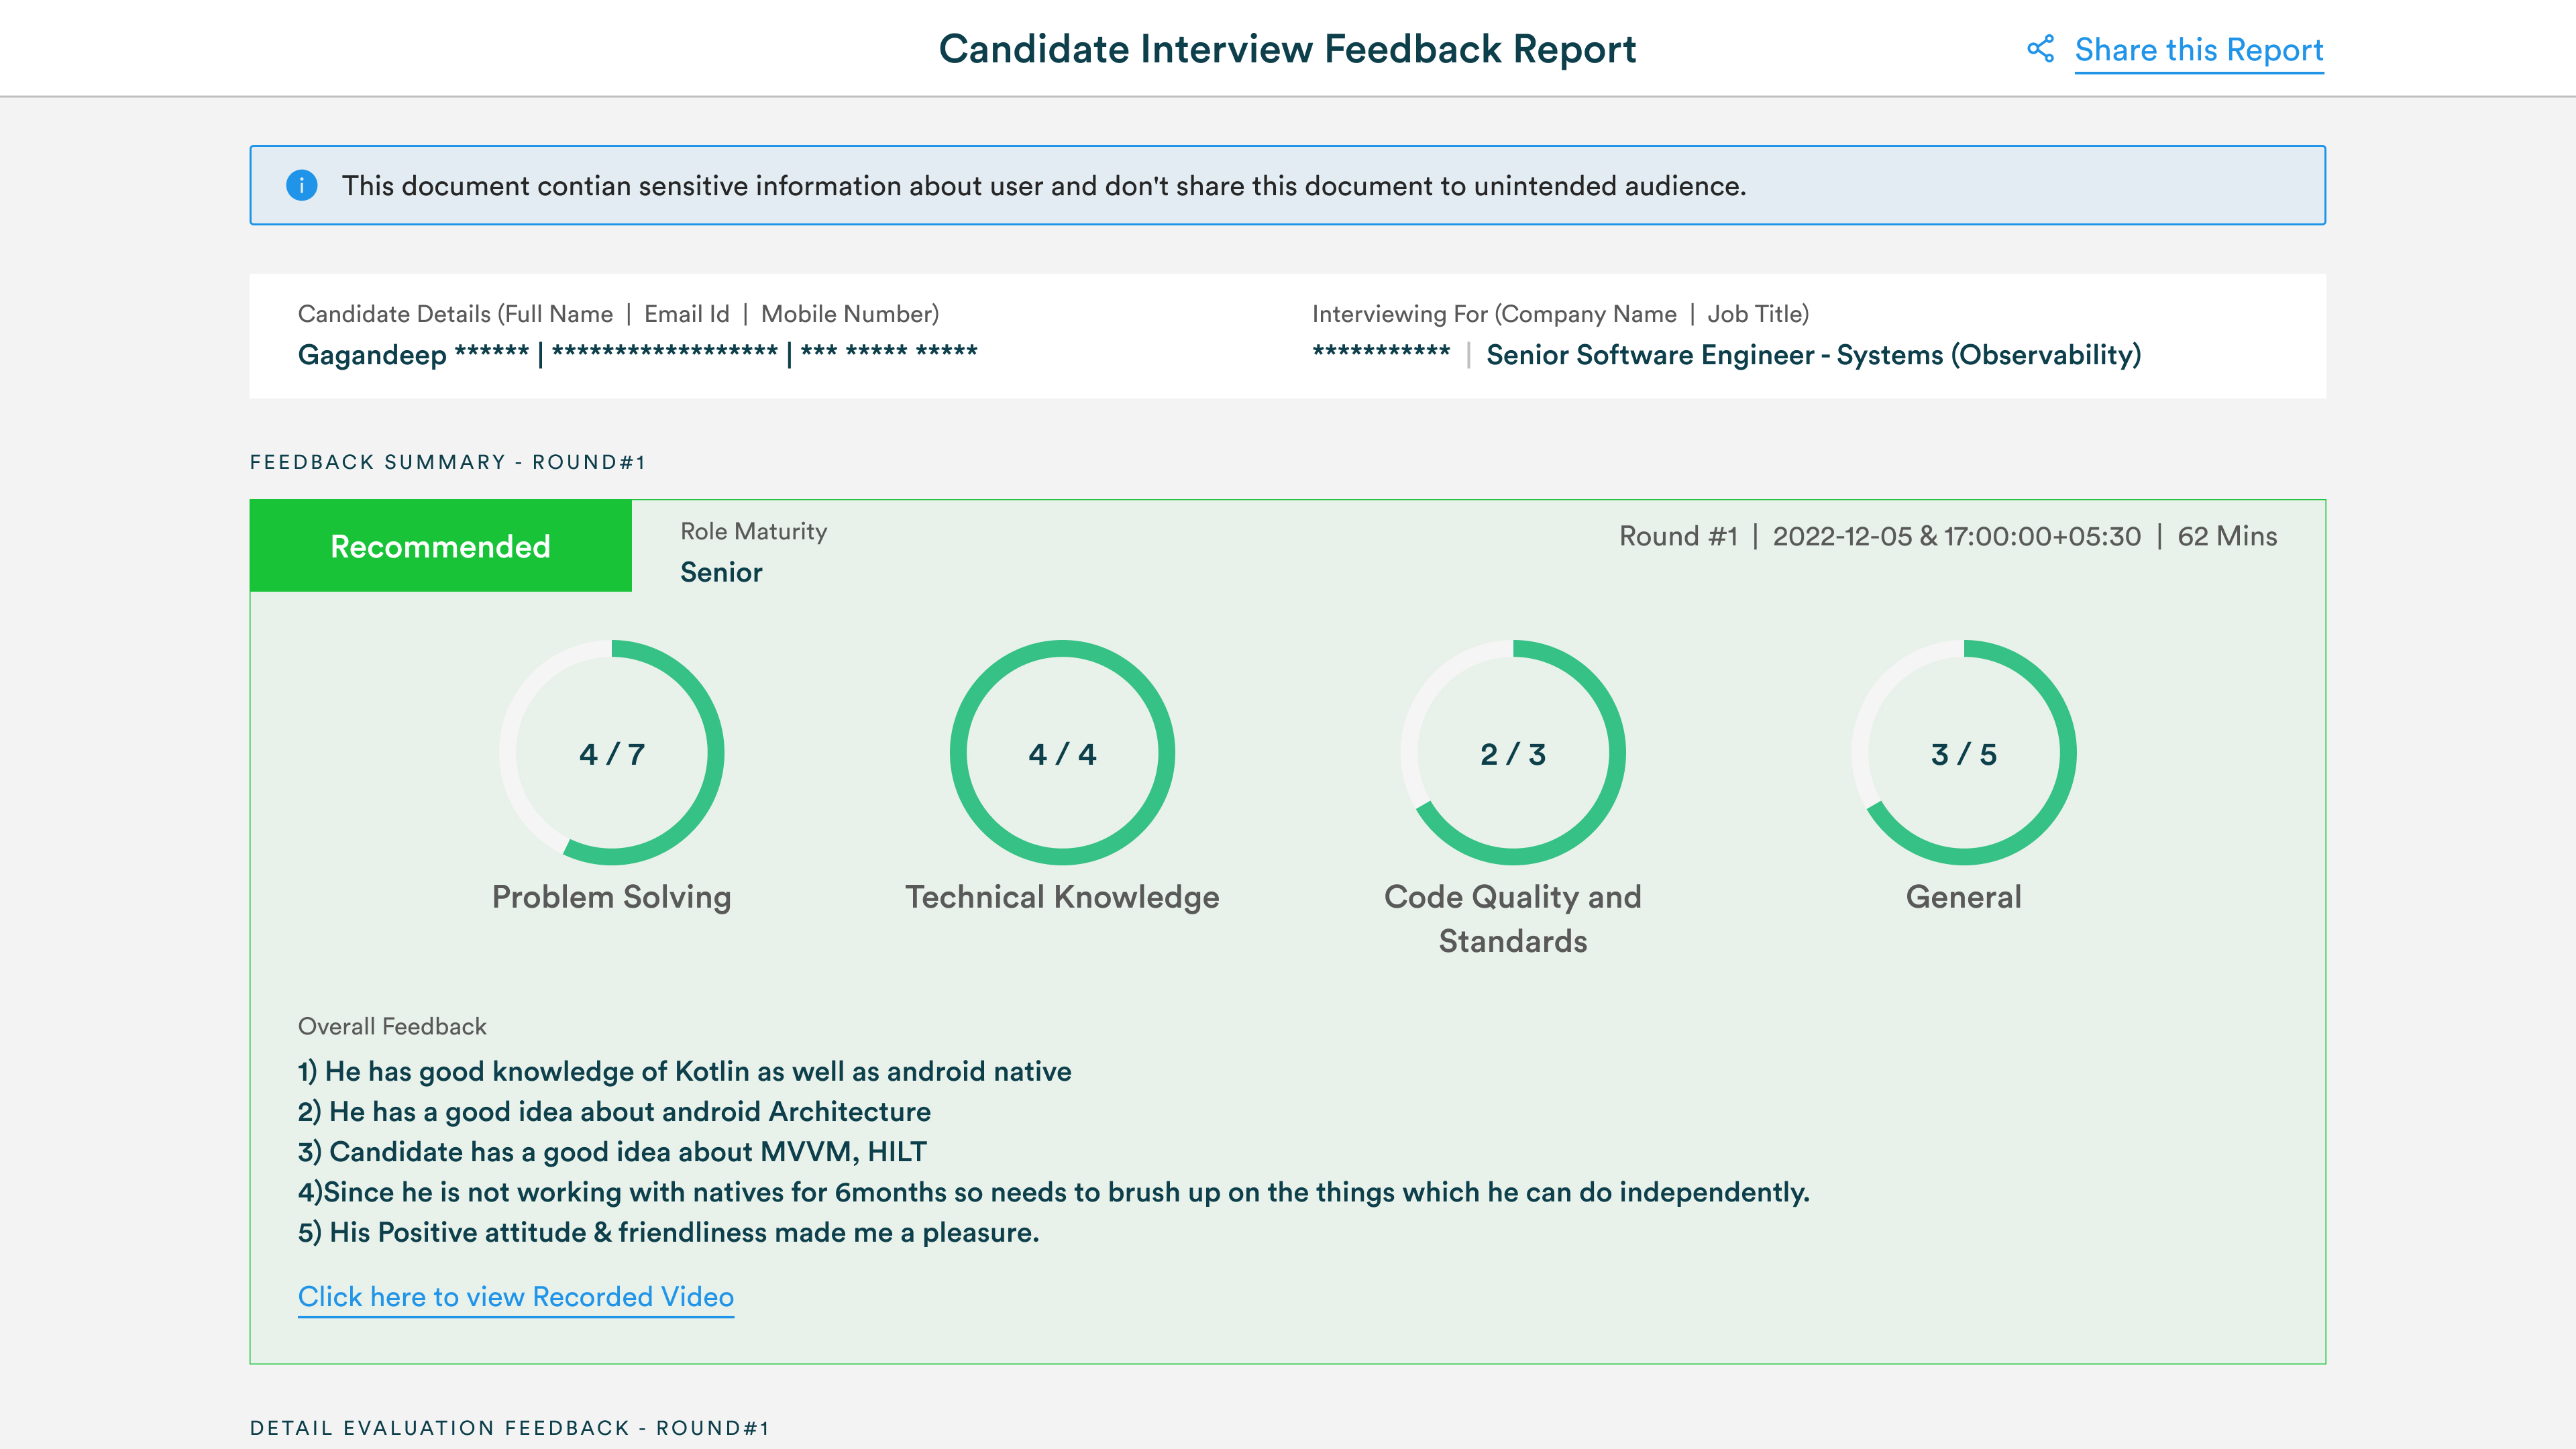 Custom Feedback Report of the Candidate Interview